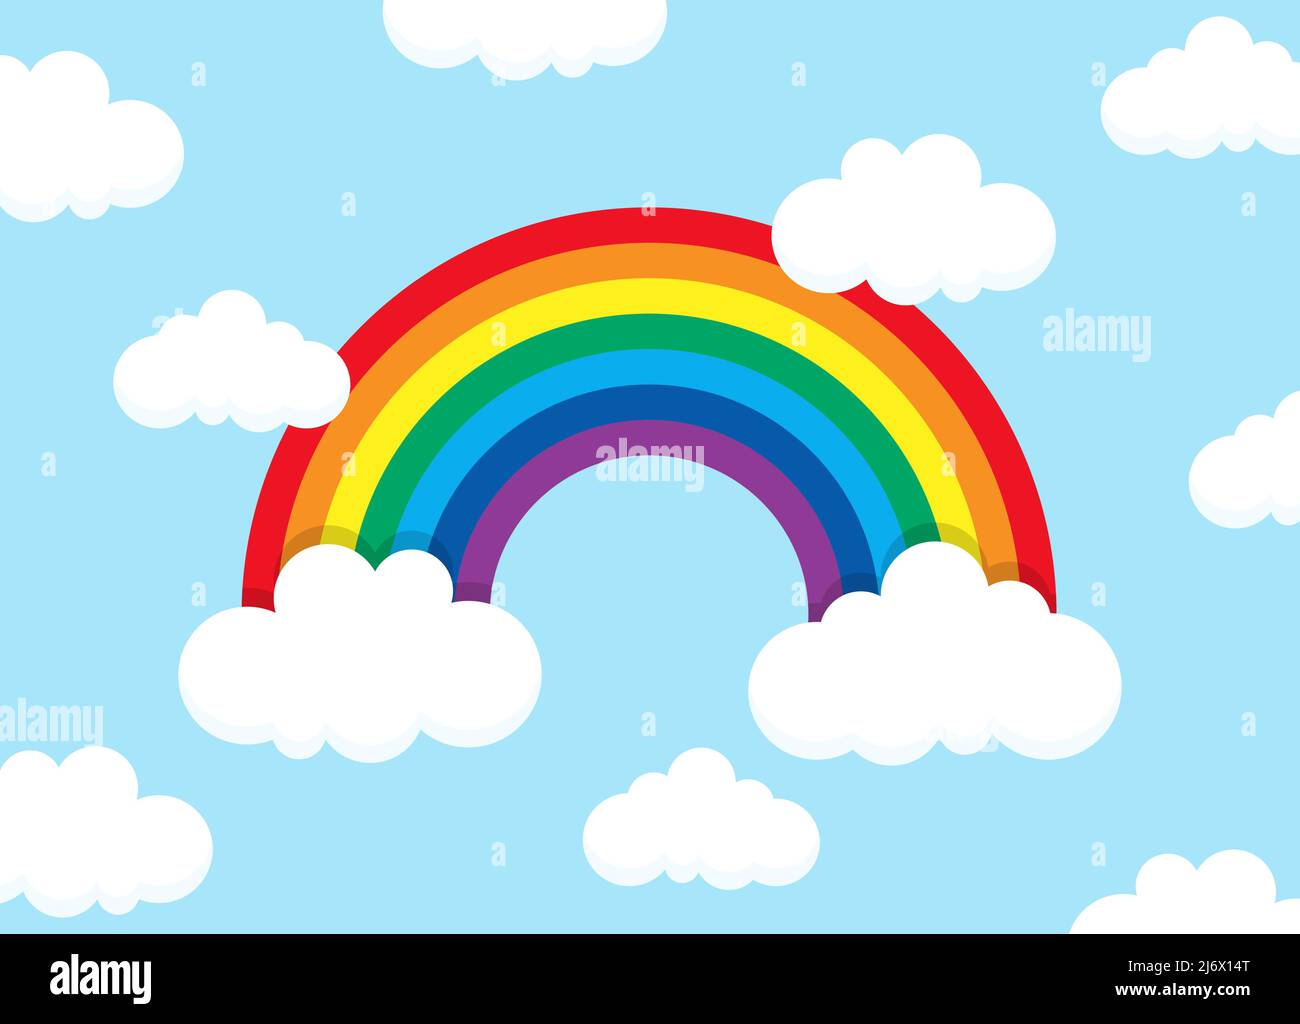 eps vector illustration showing wonderful colored rainbow with white clouds at the ends and blue background Stock Vector